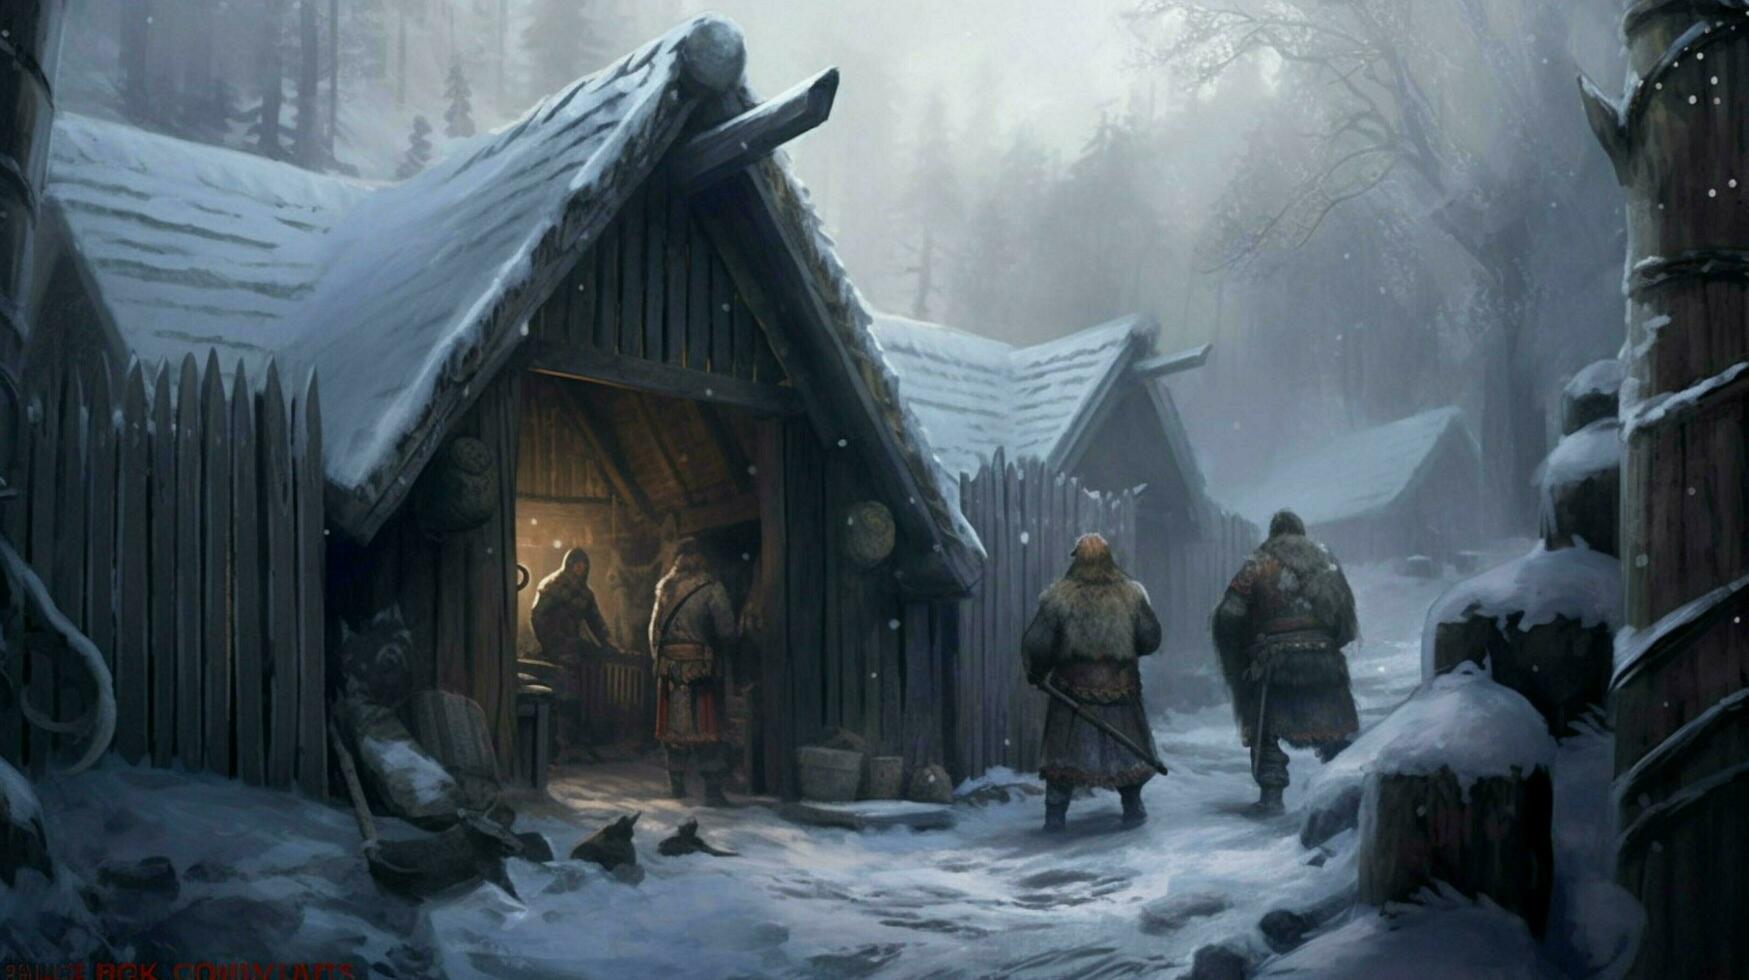 viking old person snow settlement photo